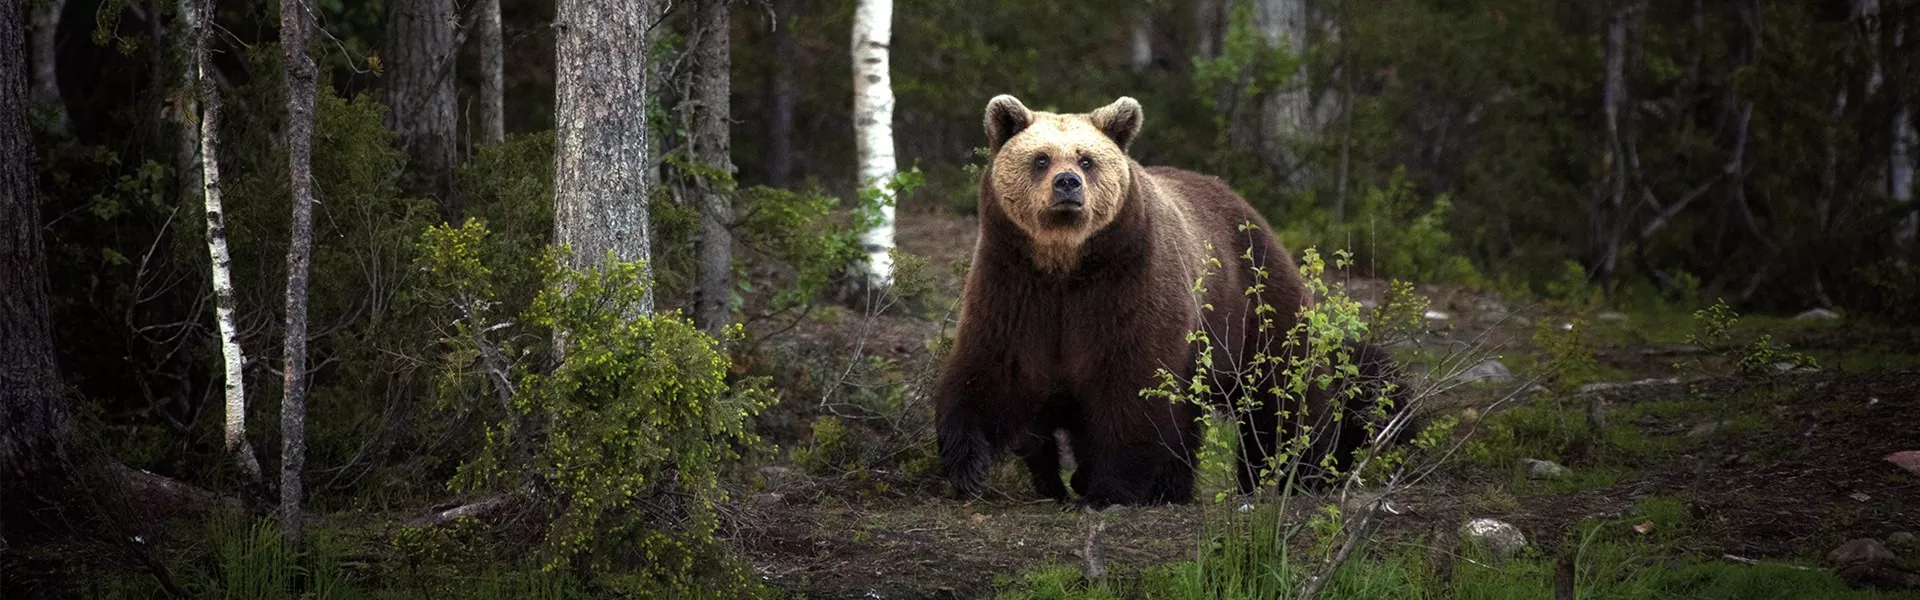 A bear in a forest in Finland